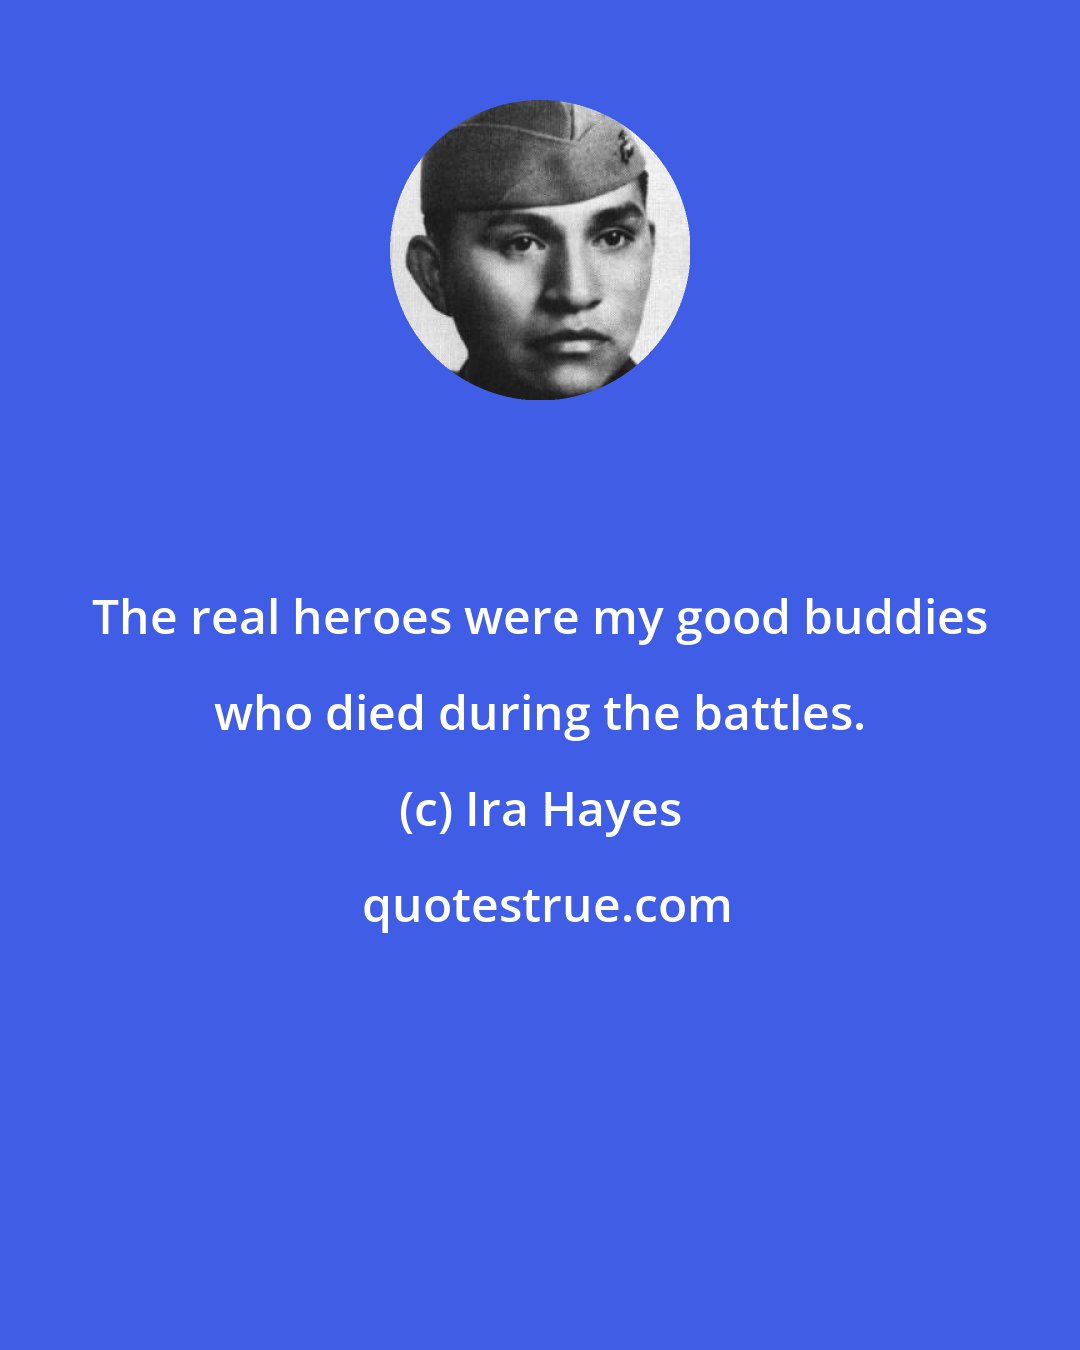 Ira Hayes: The real heroes were my good buddies who died during the battles.